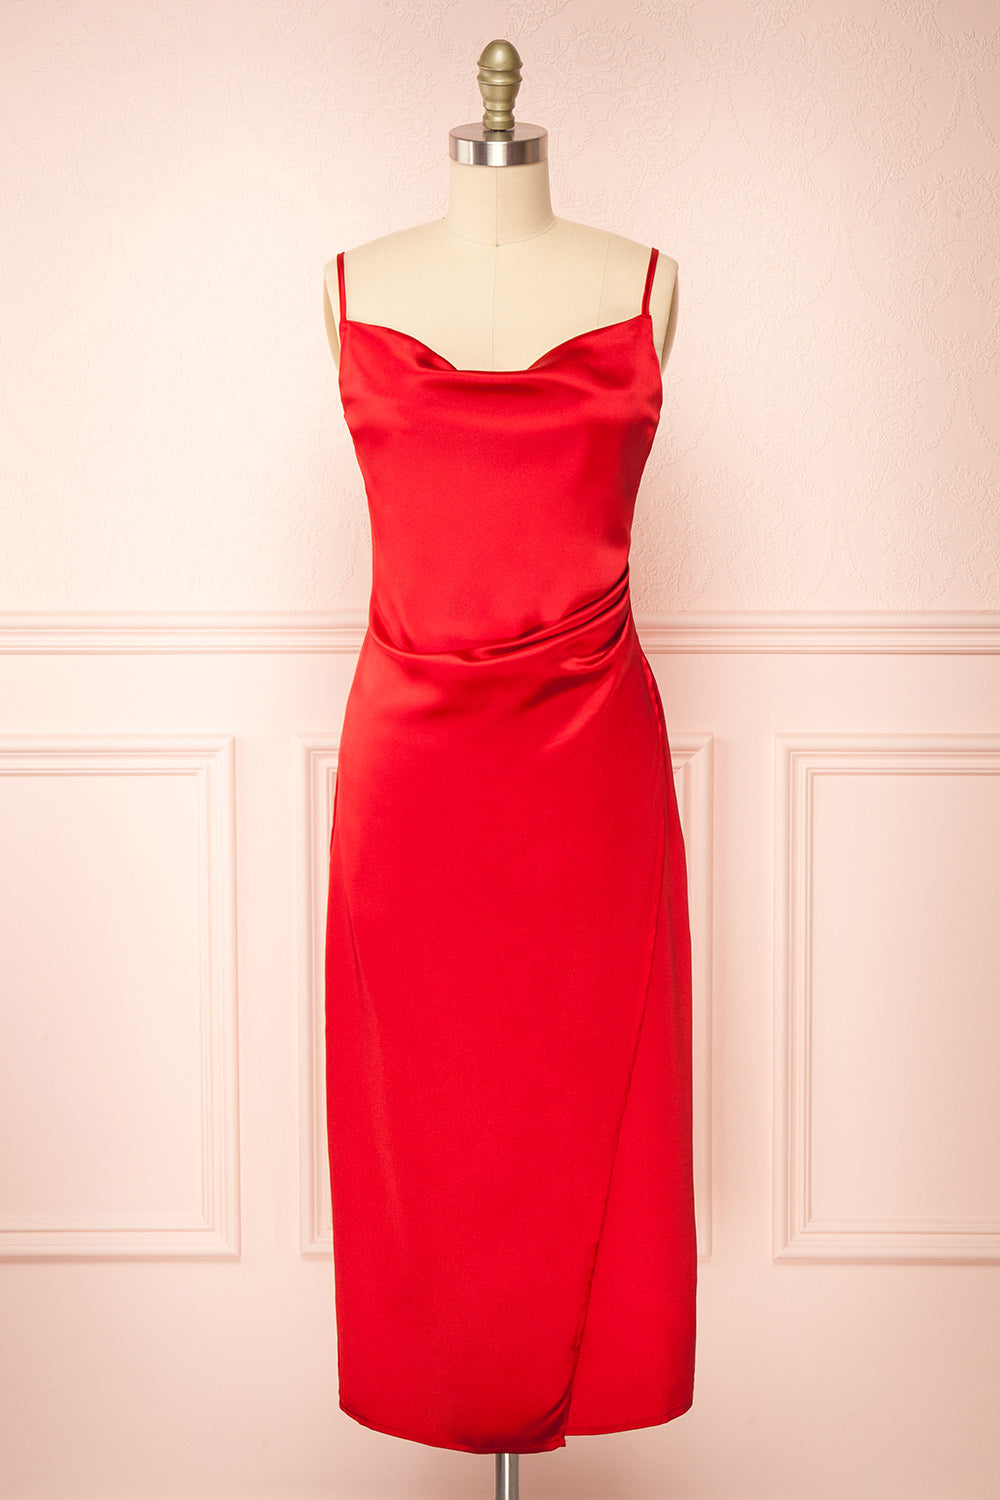 Chloee Red Silky Midi Slip Dress | Boutique 1861 front view